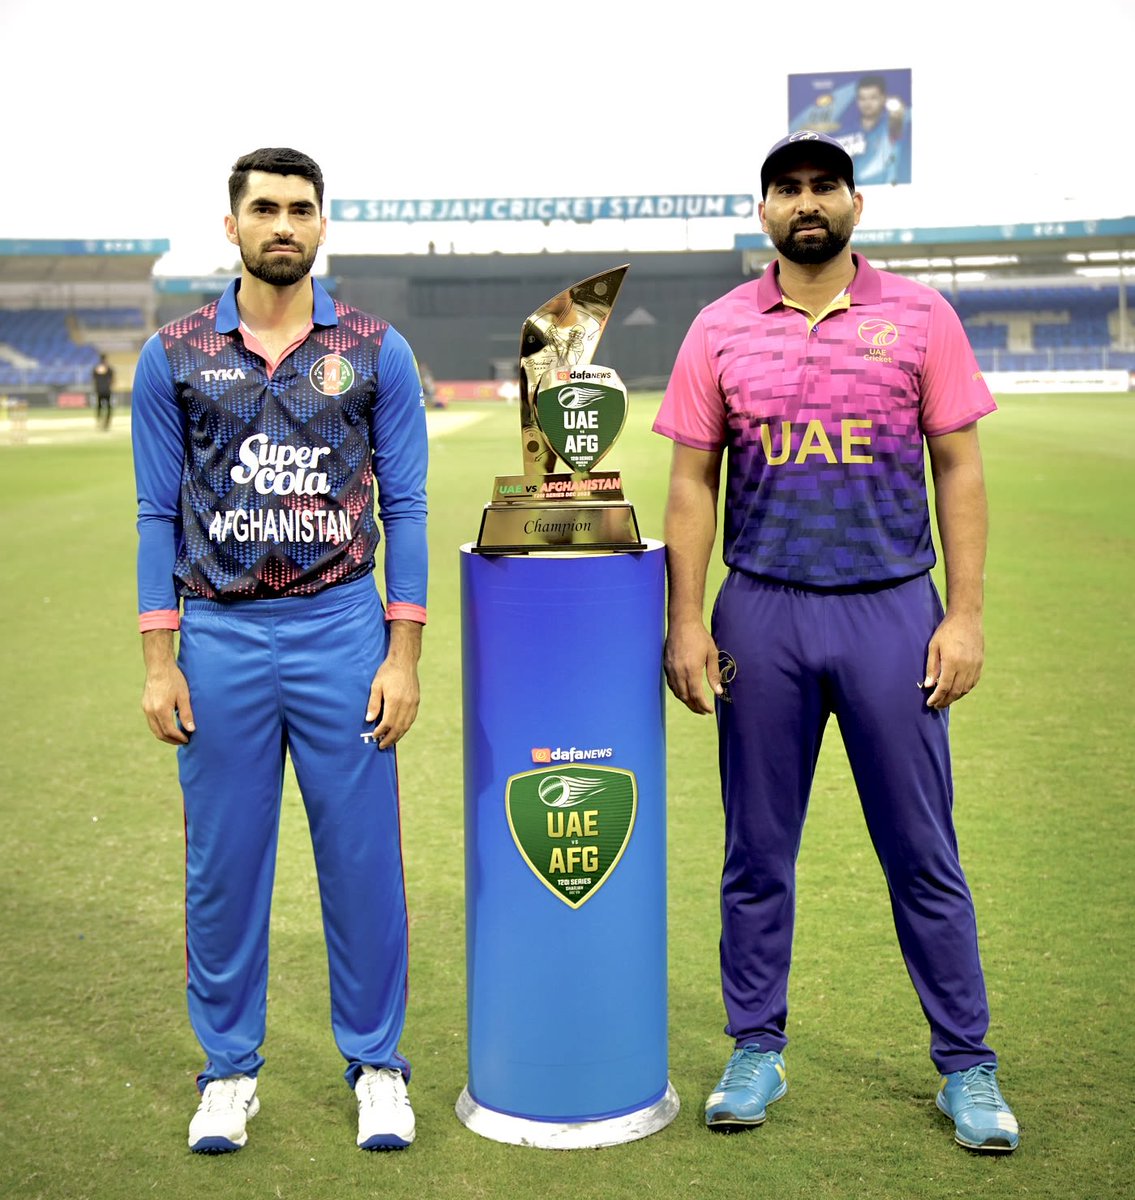 UAE vs Afghanistan, 3rd T20 International: Match Prediction

Who will win today's match between UAE vs Afghanistan?
#UAEvAFG #AFGvUAE 
#CricketTwitter